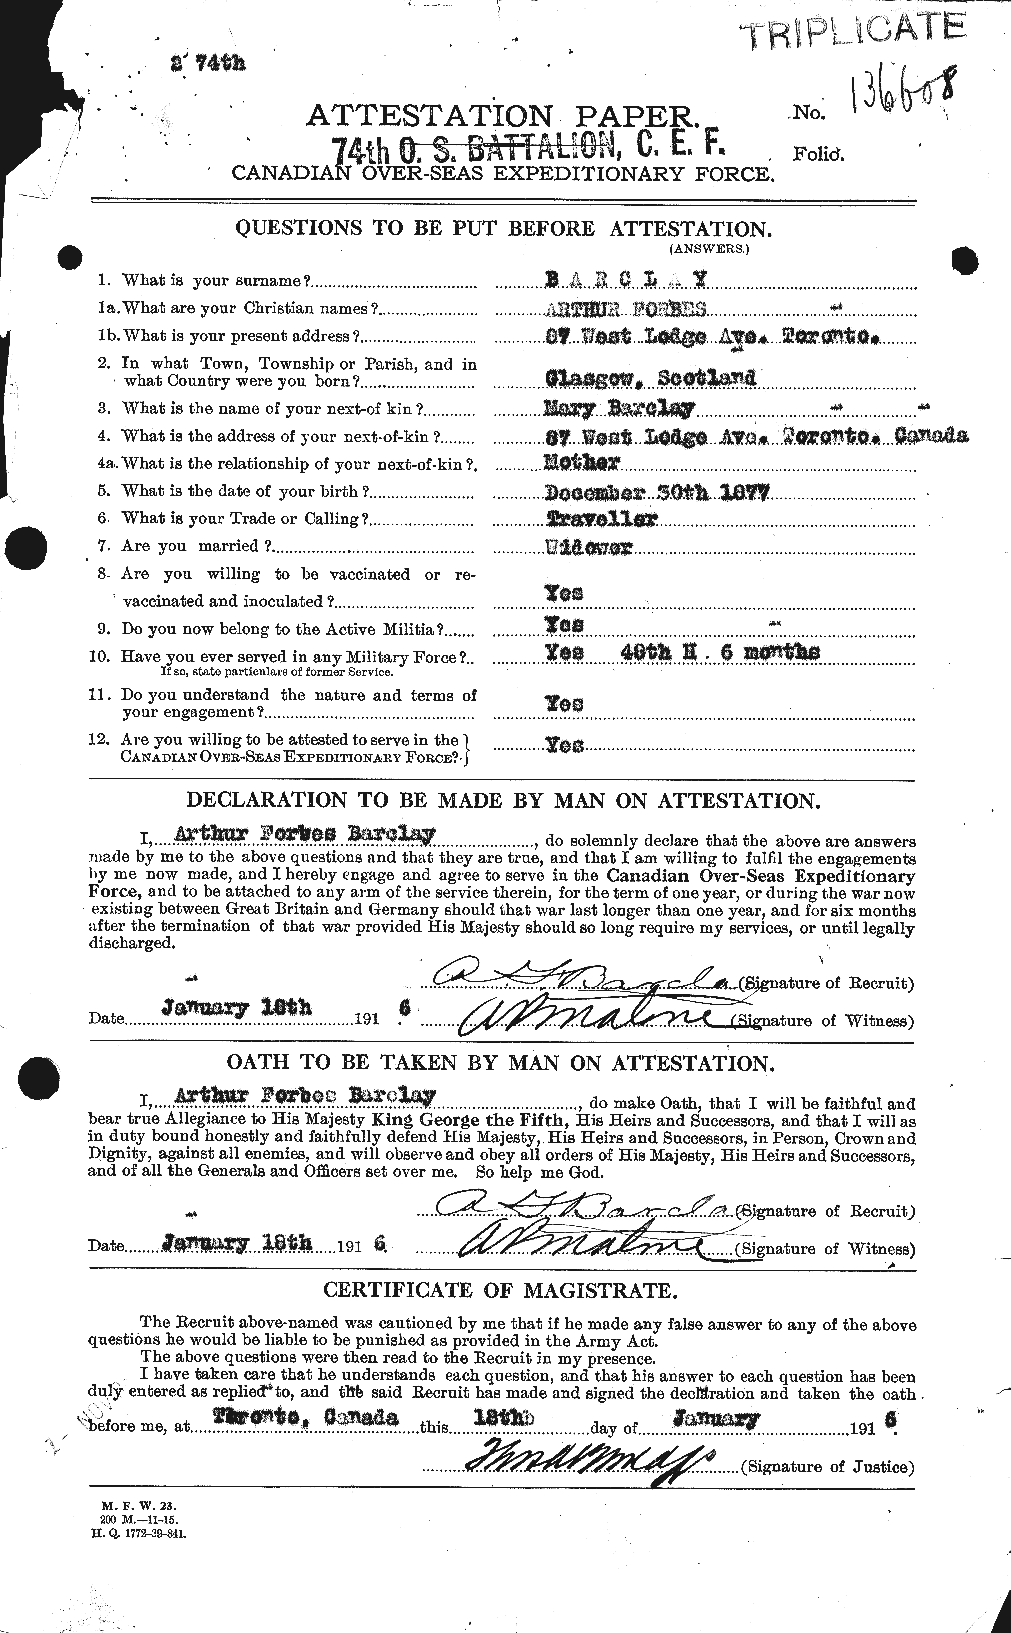 Personnel Records of the First World War - CEF 220961a